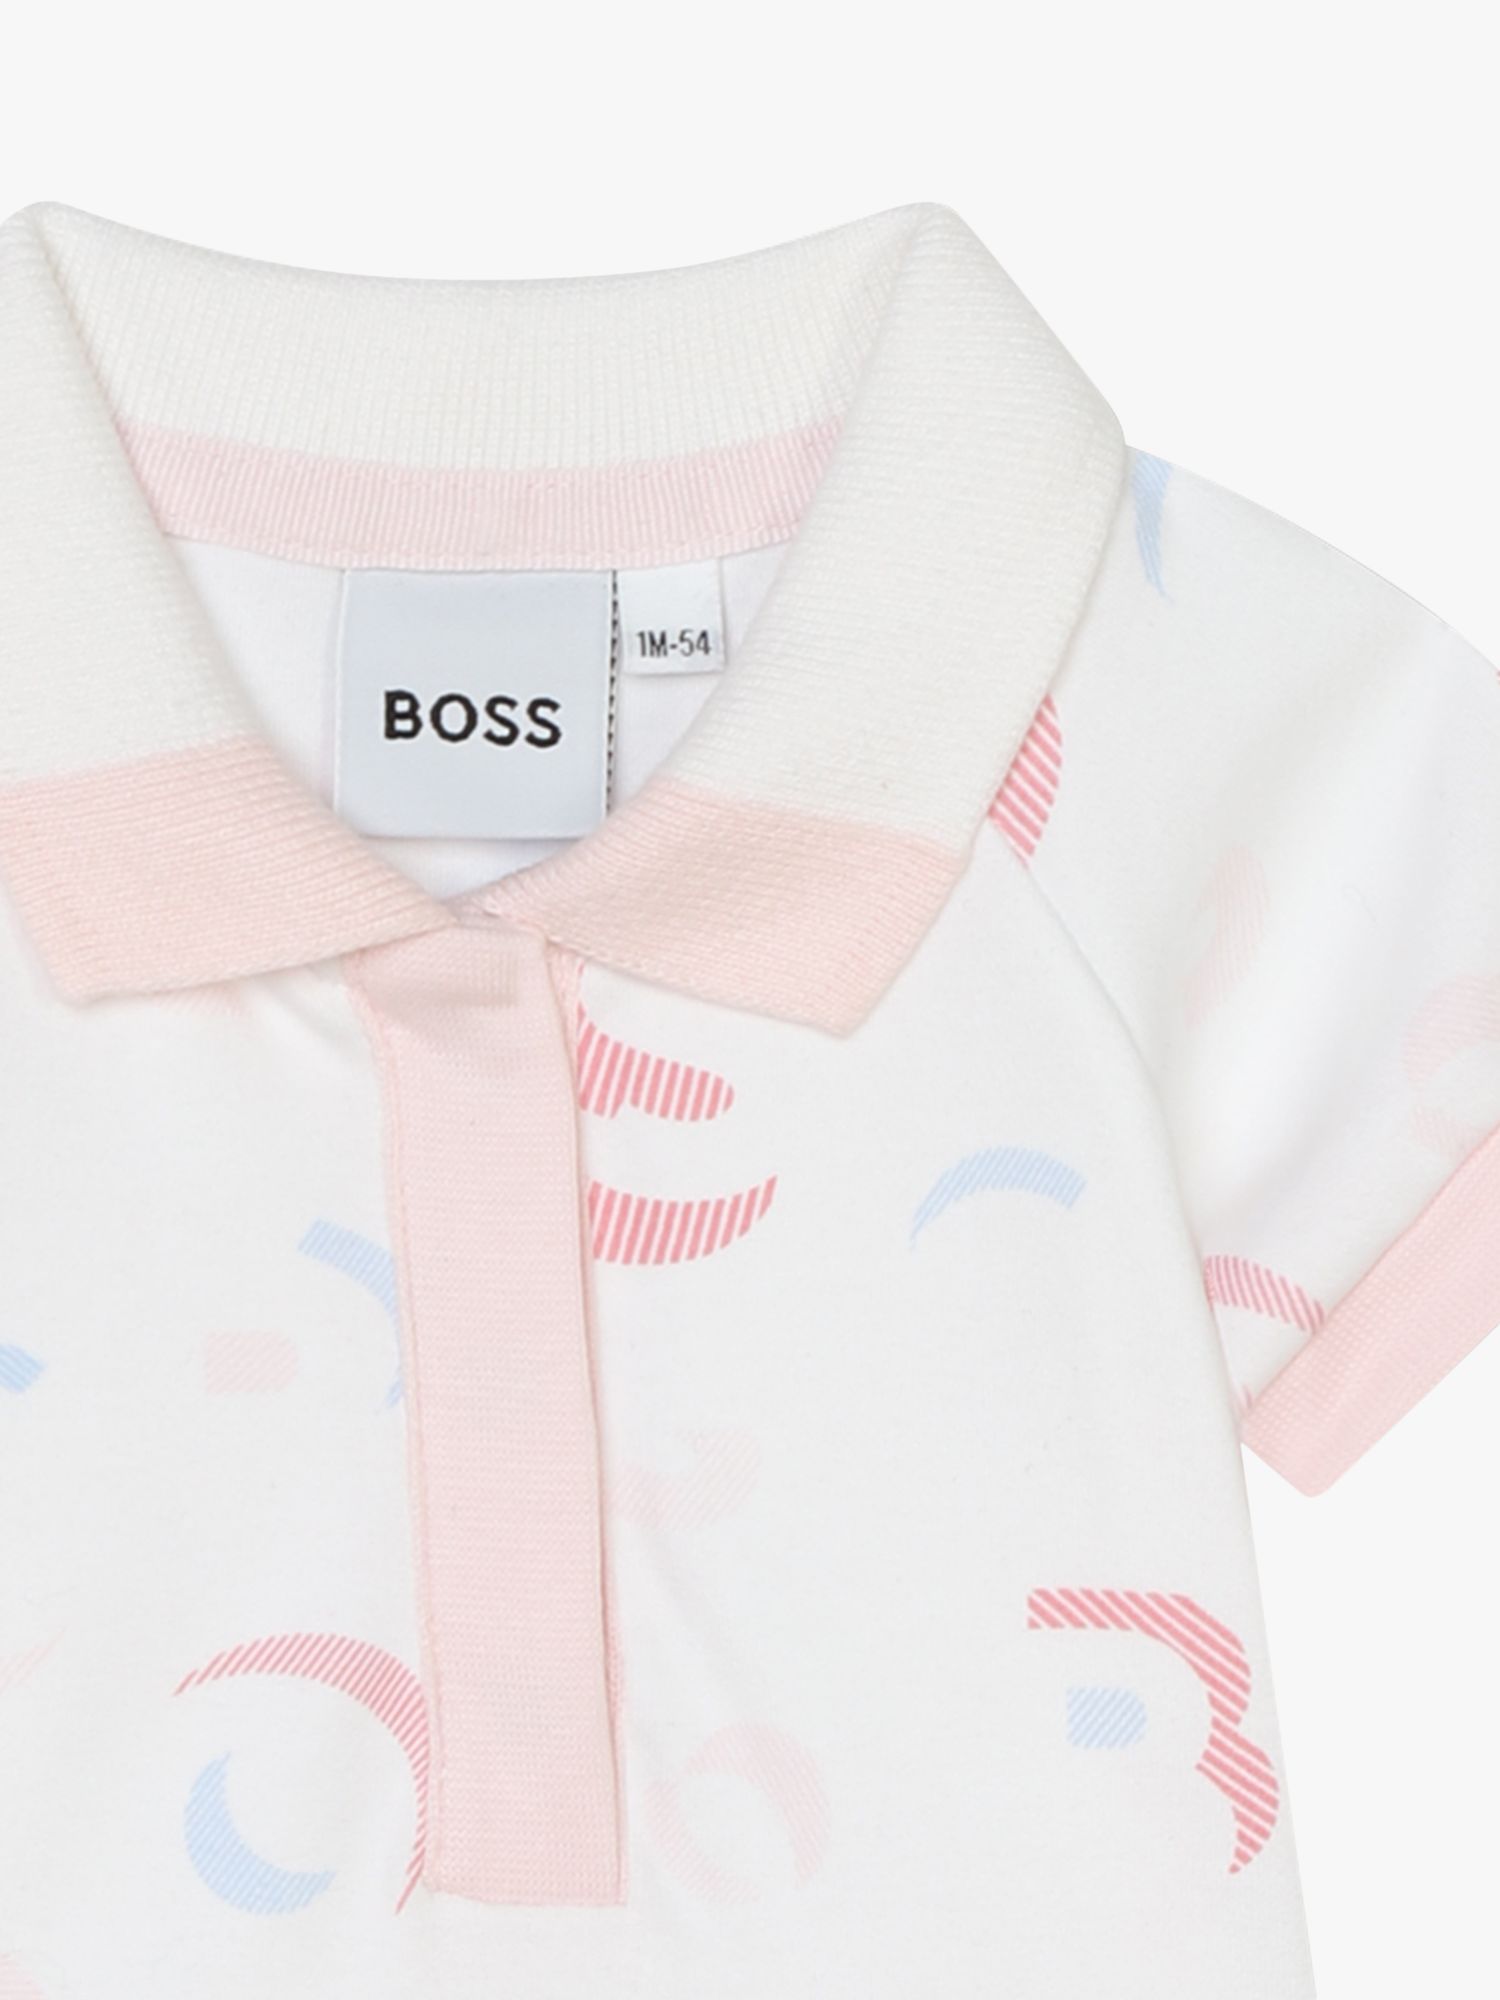 BOSS Baby Polo Collar All In One, White, 3 months